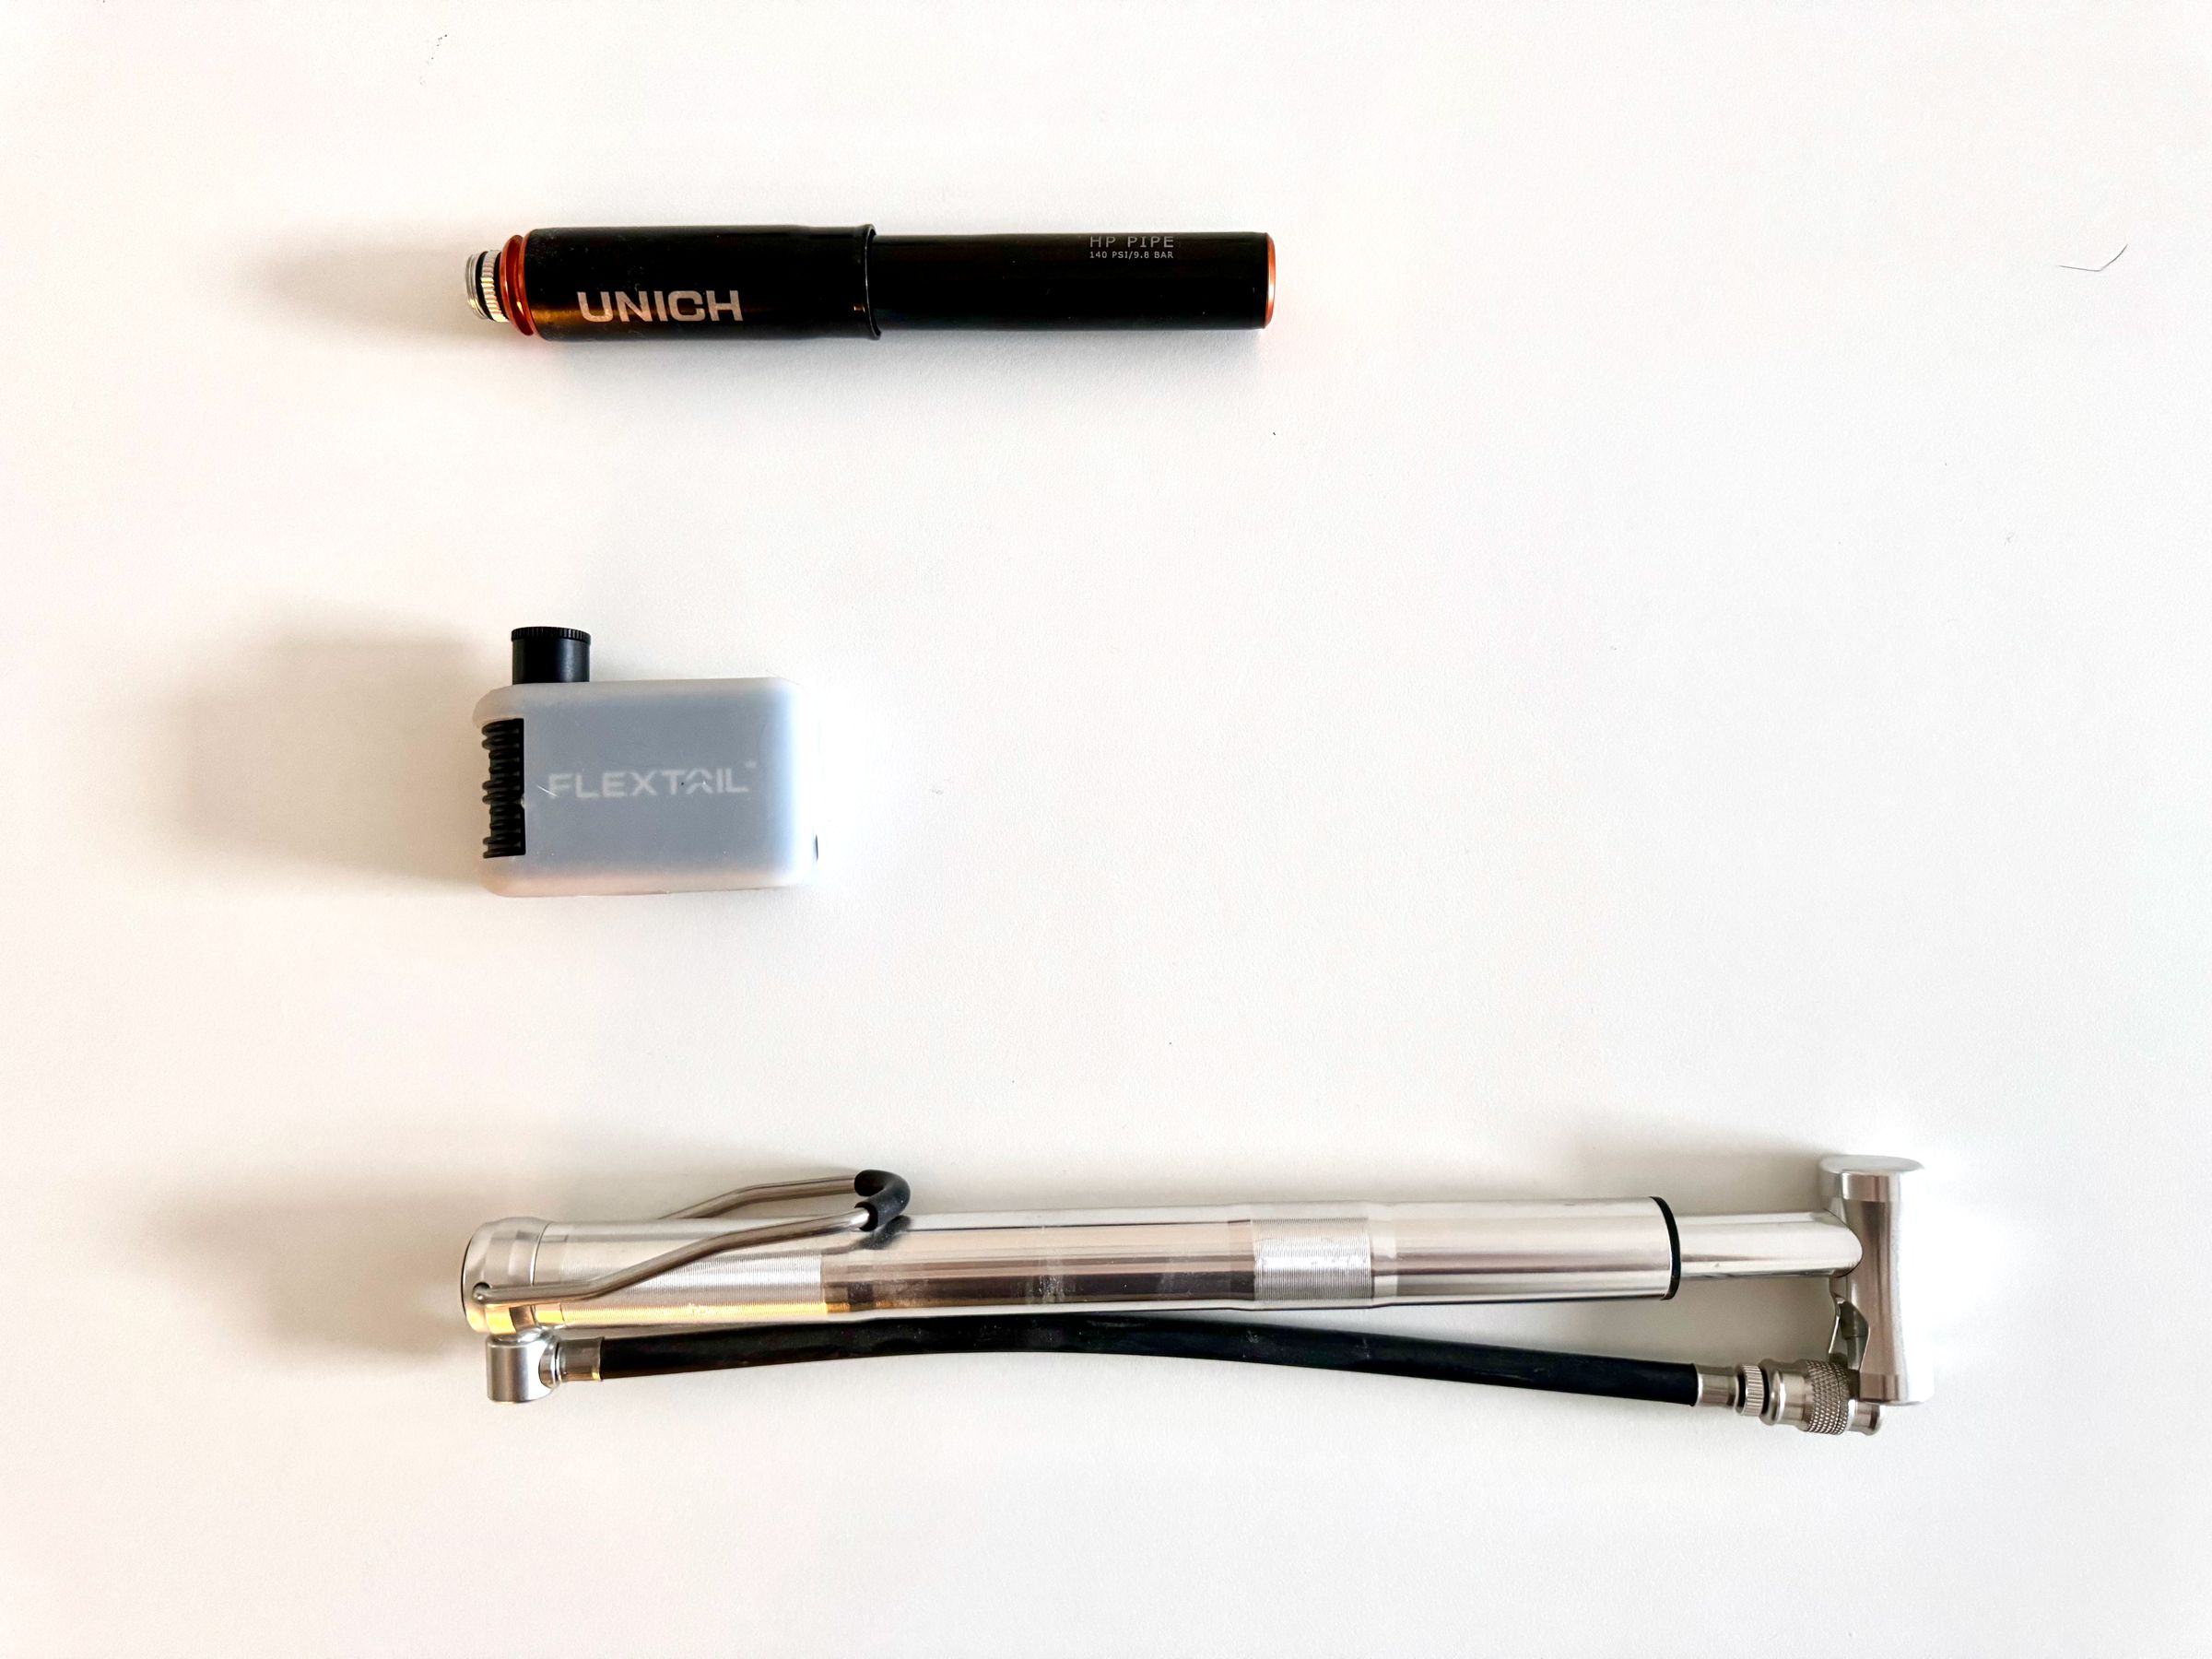 <em>The Flextail compared to two mini pumps, my trusty Unich pump (top) and a mini standing pump from Pro Bike Tool (bottom).</em>